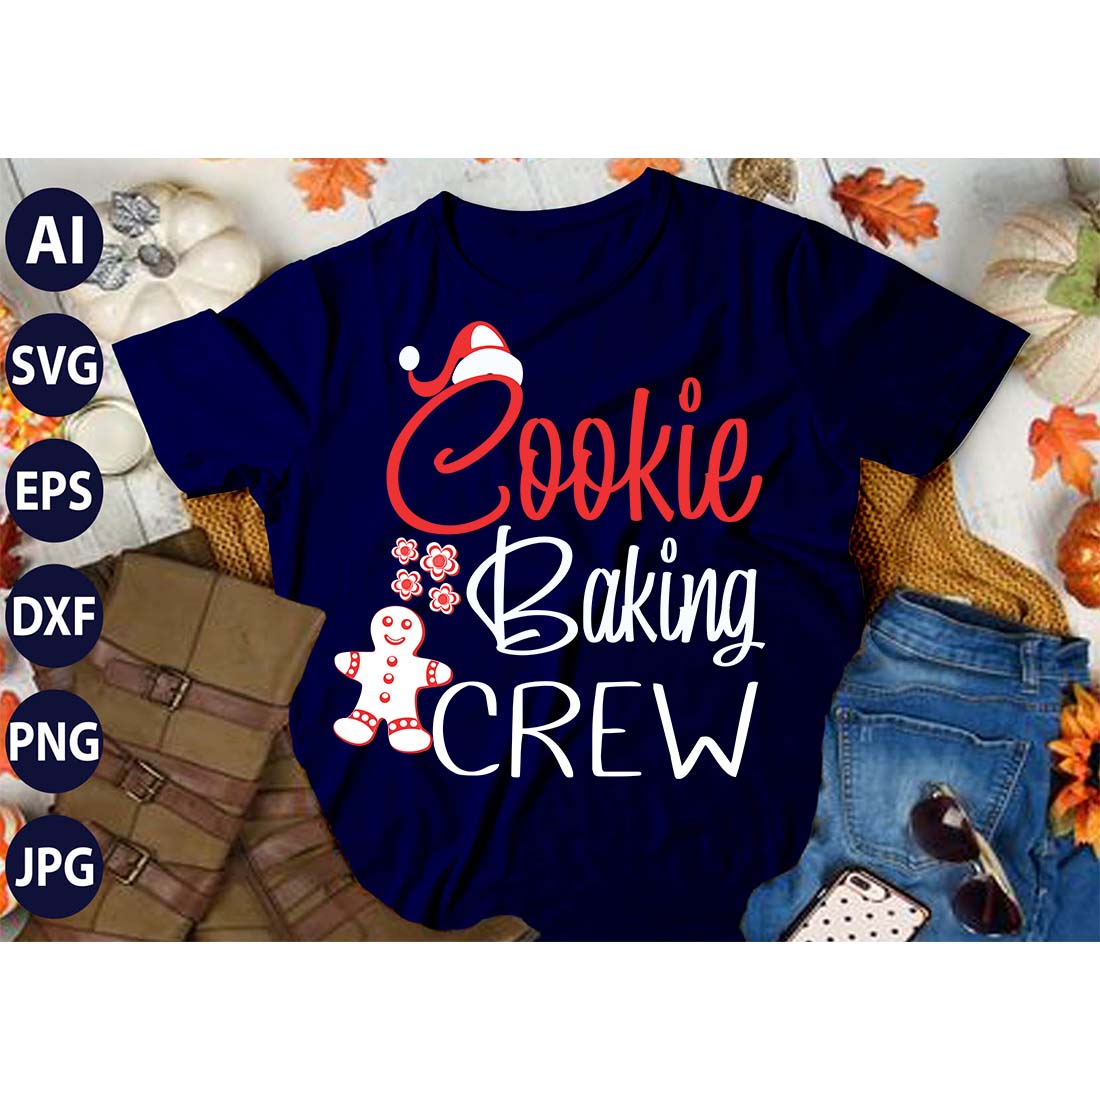 Cookie Baking Crew, SVG T-Shirt Design |Christmas Retro It's All About Jesus Typography Tshirt Design | Ai, Svg, Eps, Dxf, Jpeg, Png, Instant download T-Shirt | 100% print-ready Digital vector file cover image.